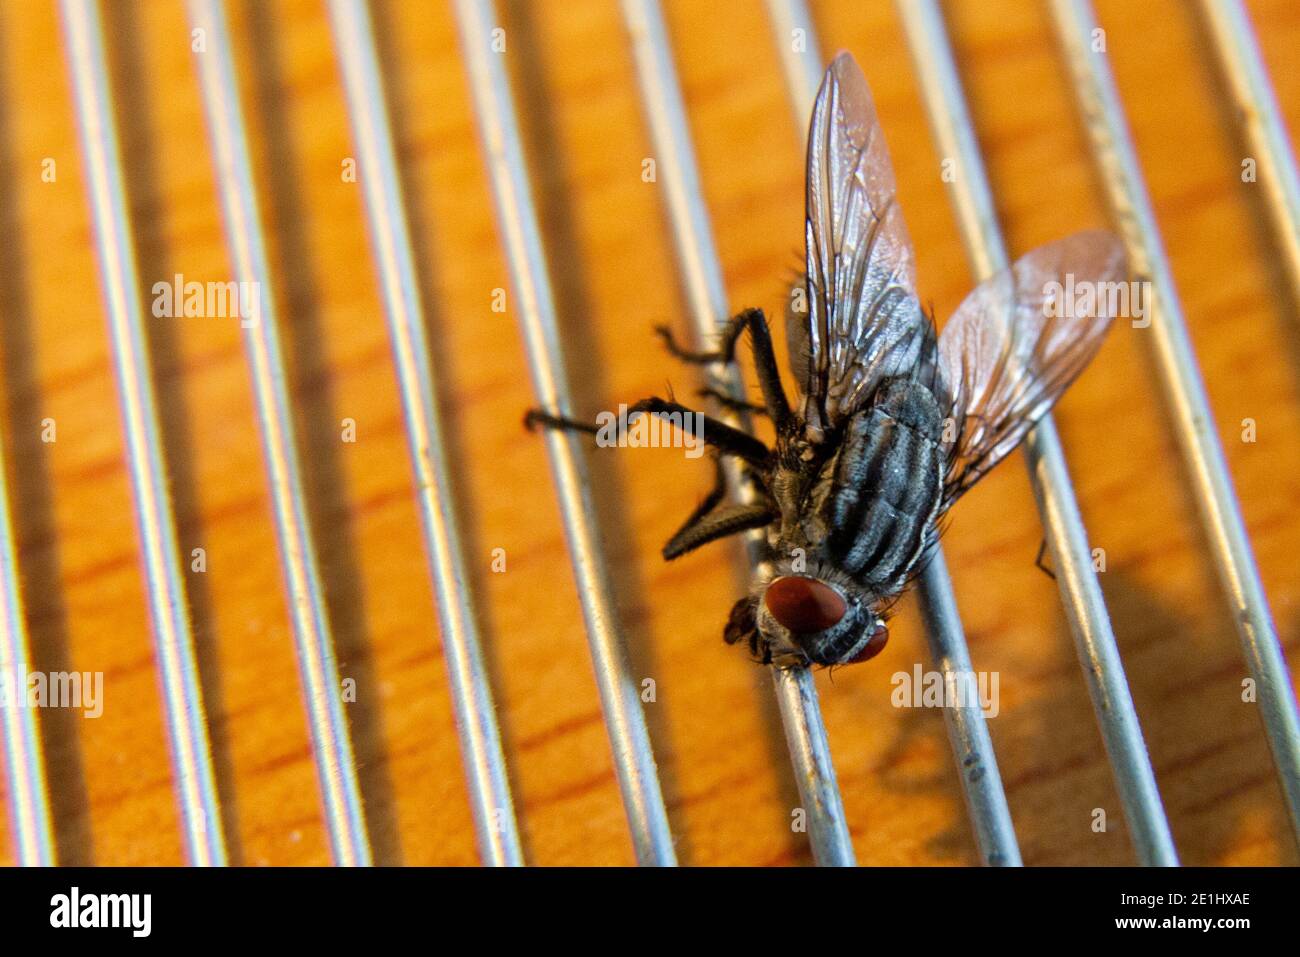 Close-up of a housefly Stock Photo